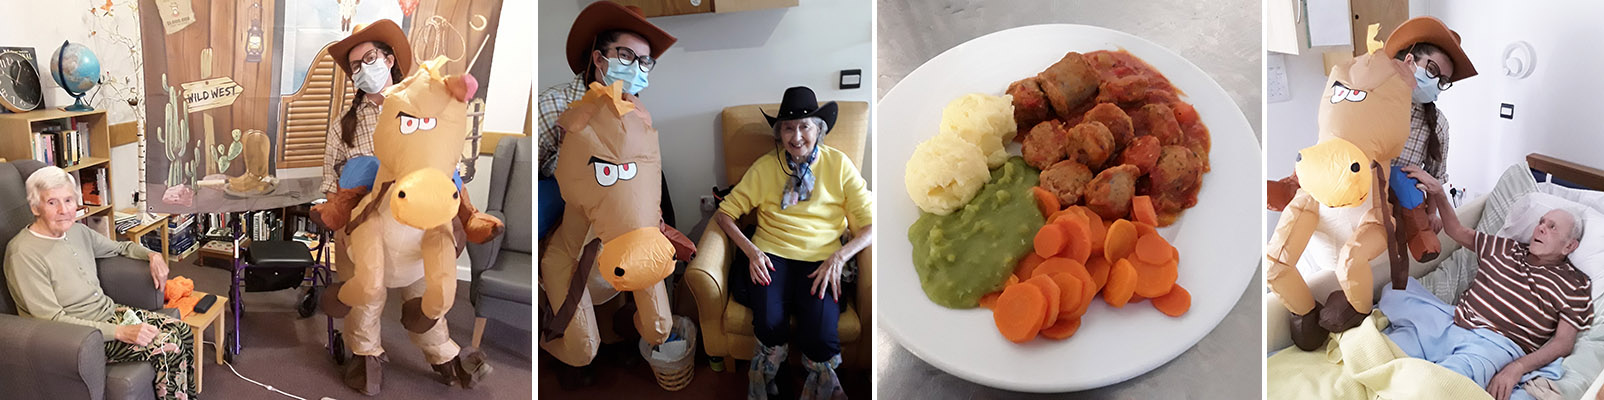 Country and Western Day fancy dress and themed food at Hengist Field Care Home